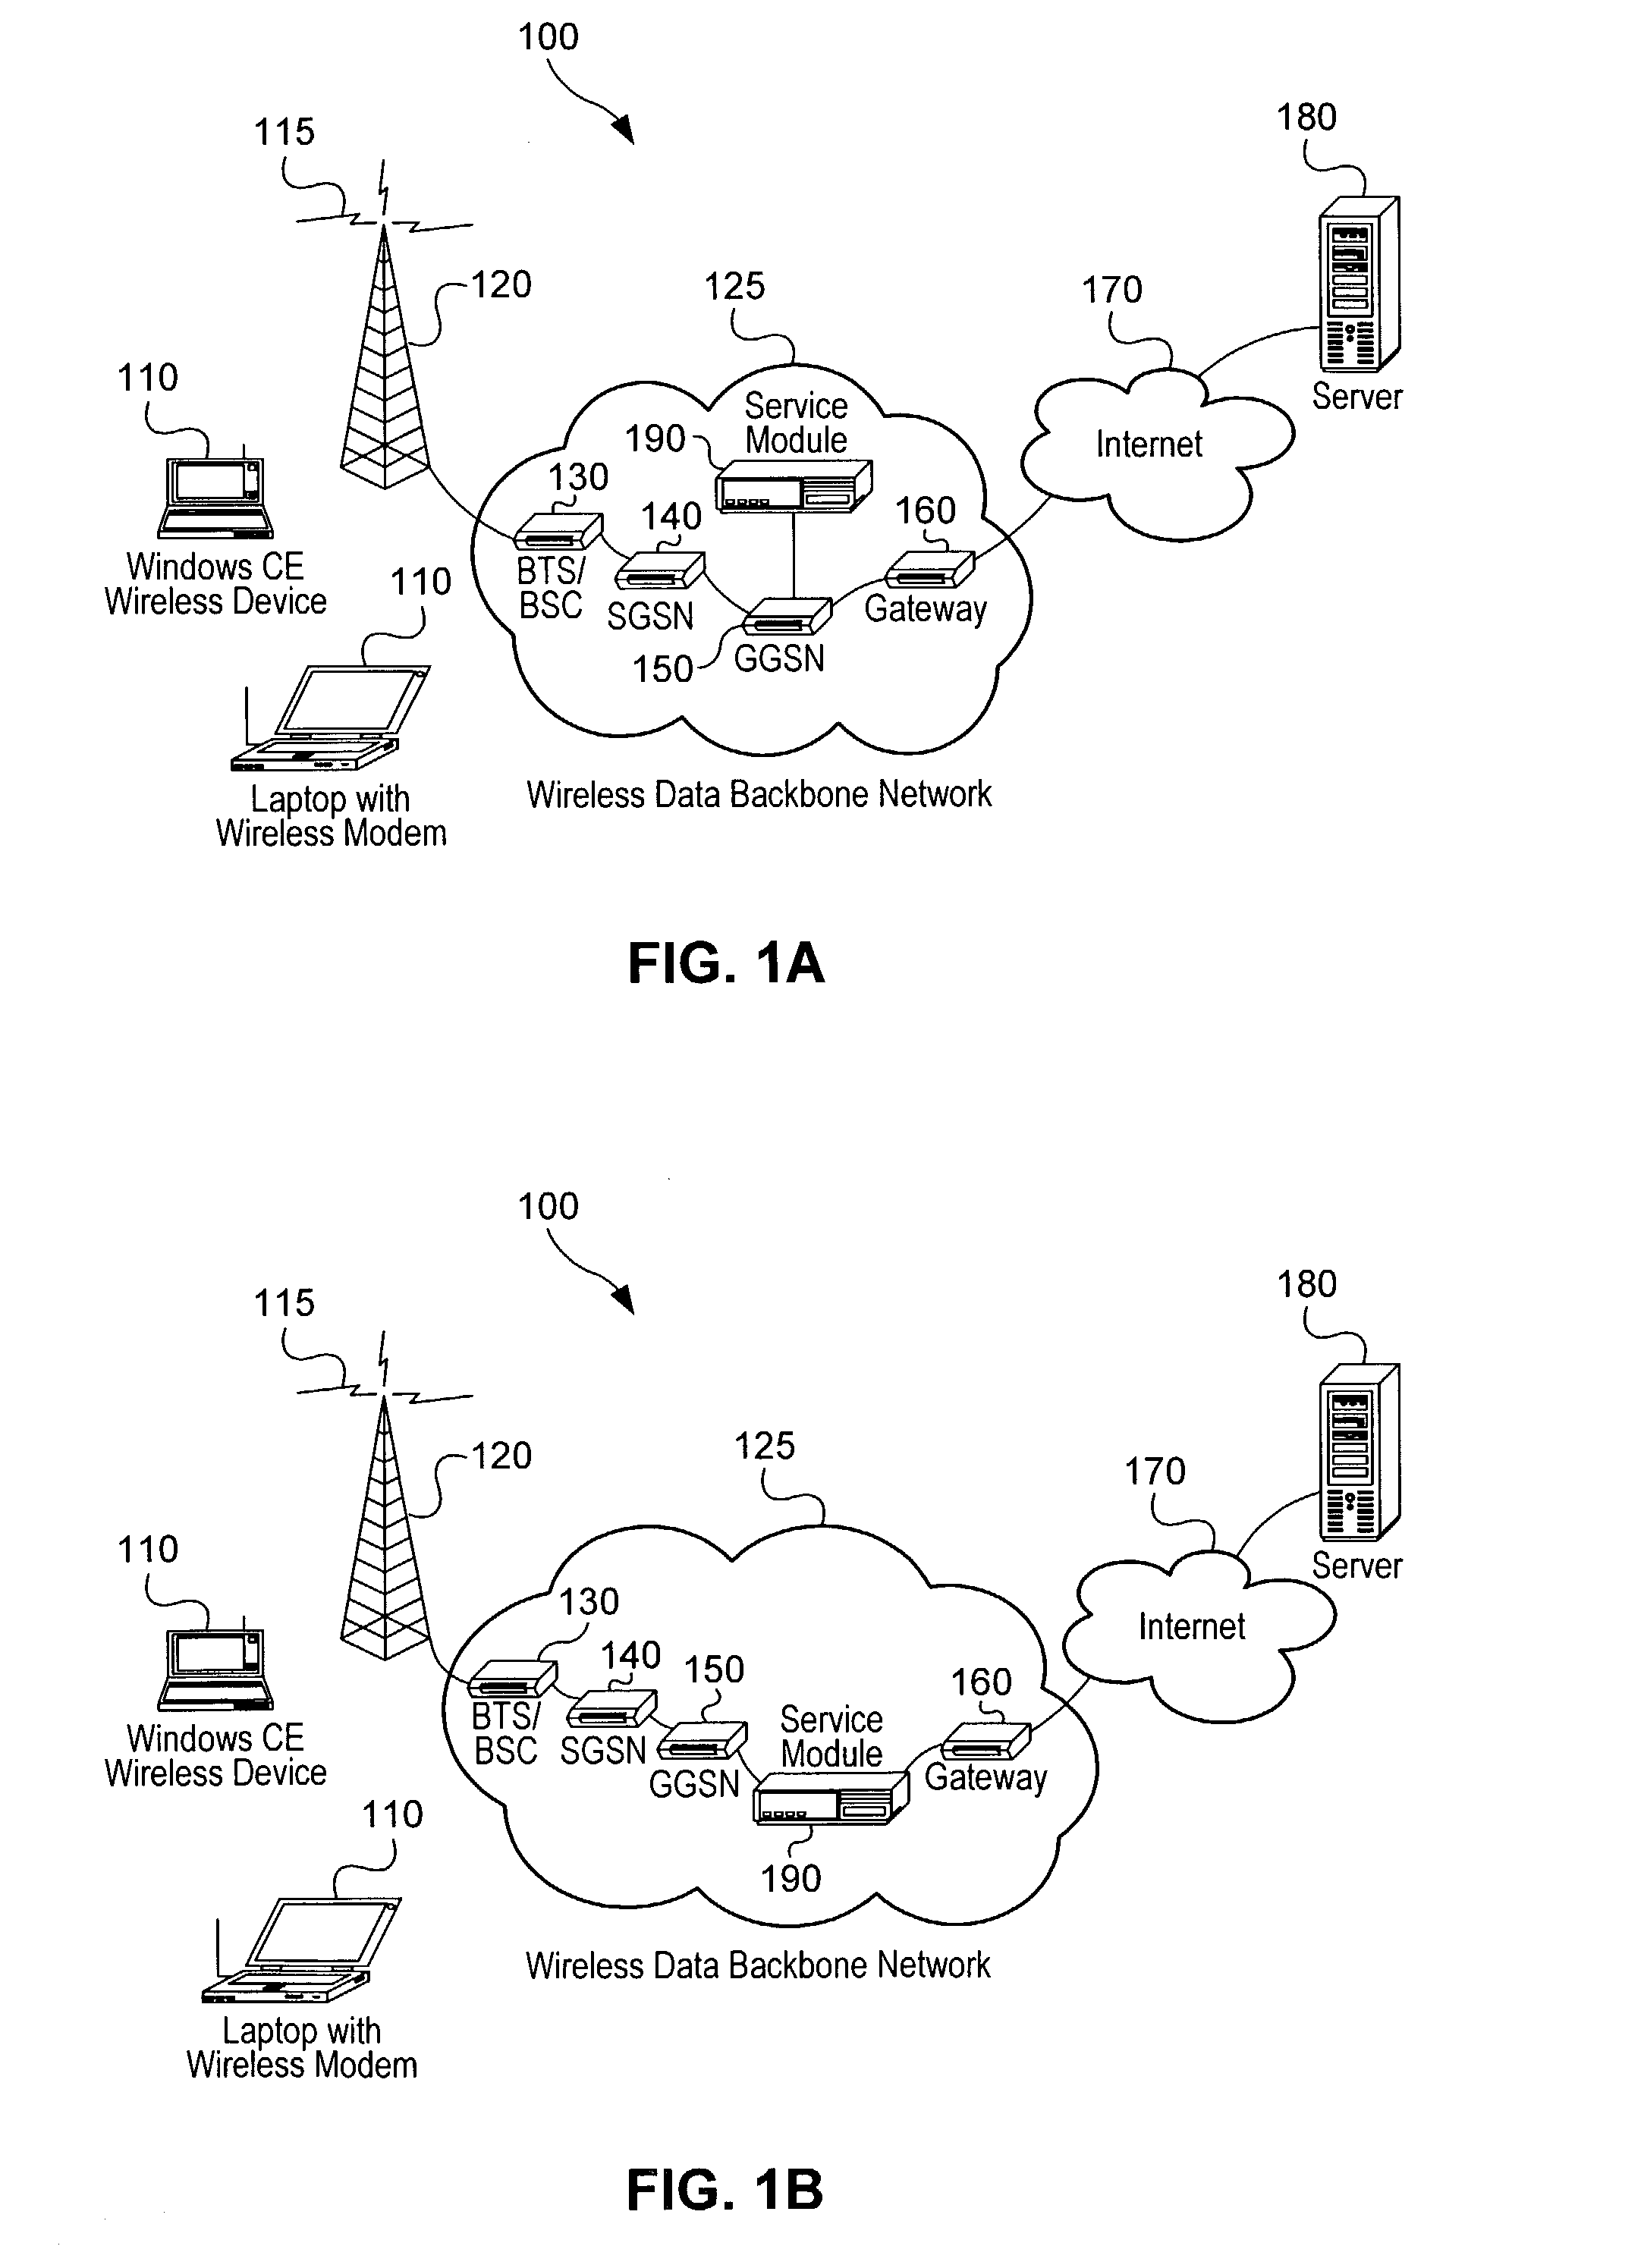 Systems and methods for providing differentiated services within a network communication system